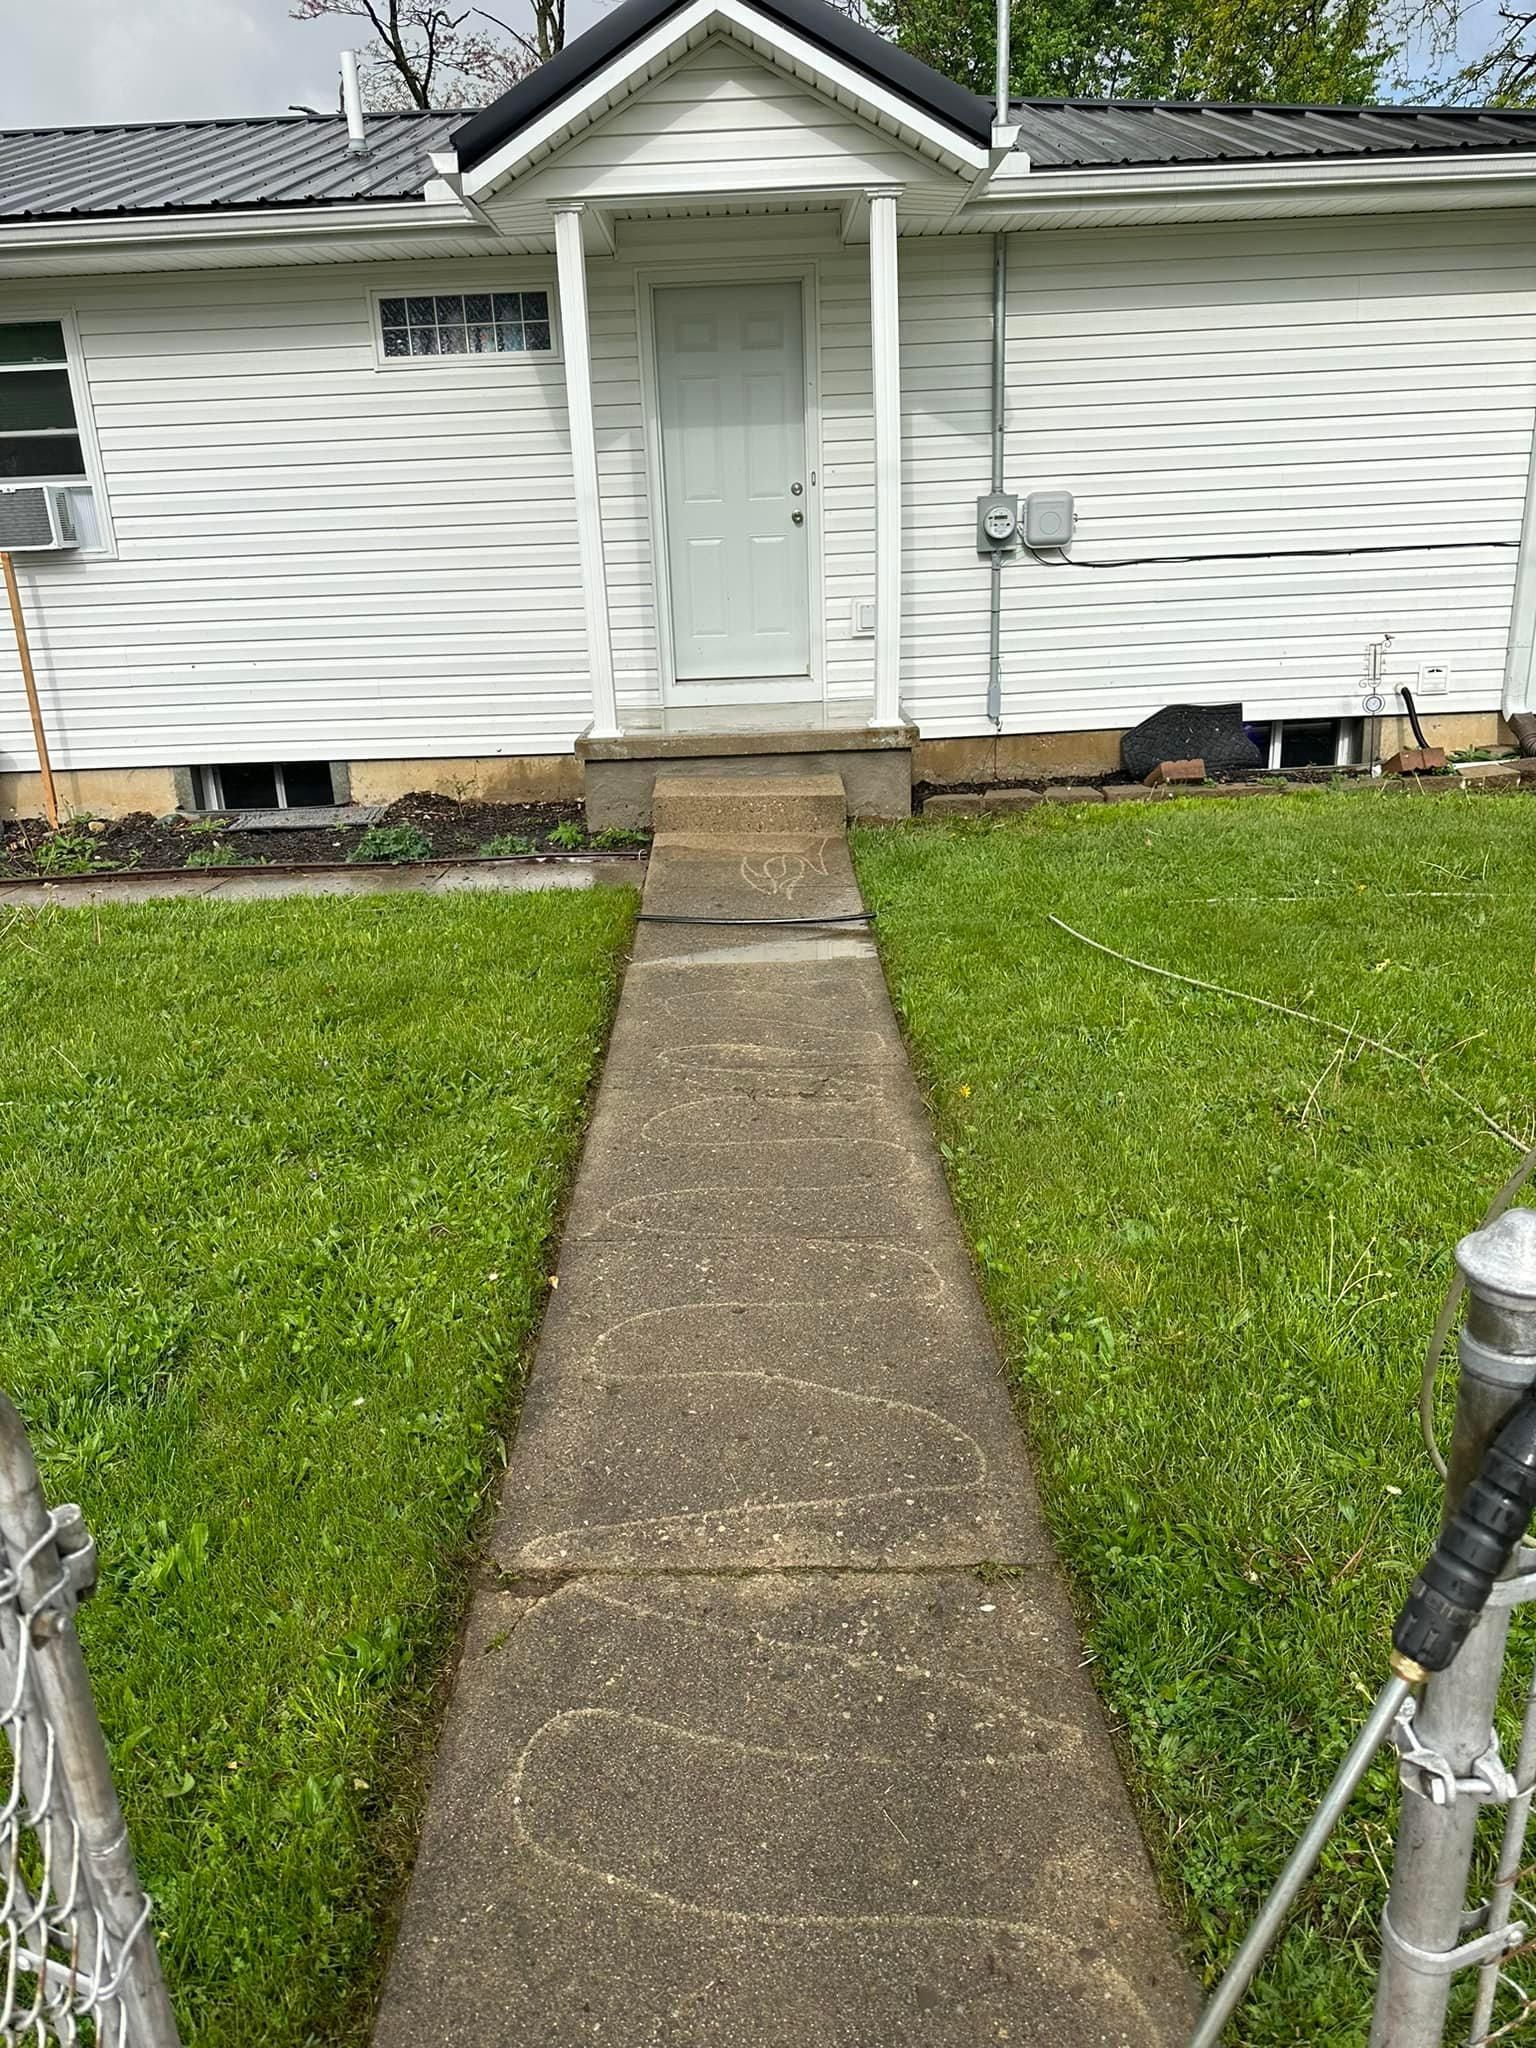  for LJD Lawn Service & Power Washing LLC  in Anna, OH